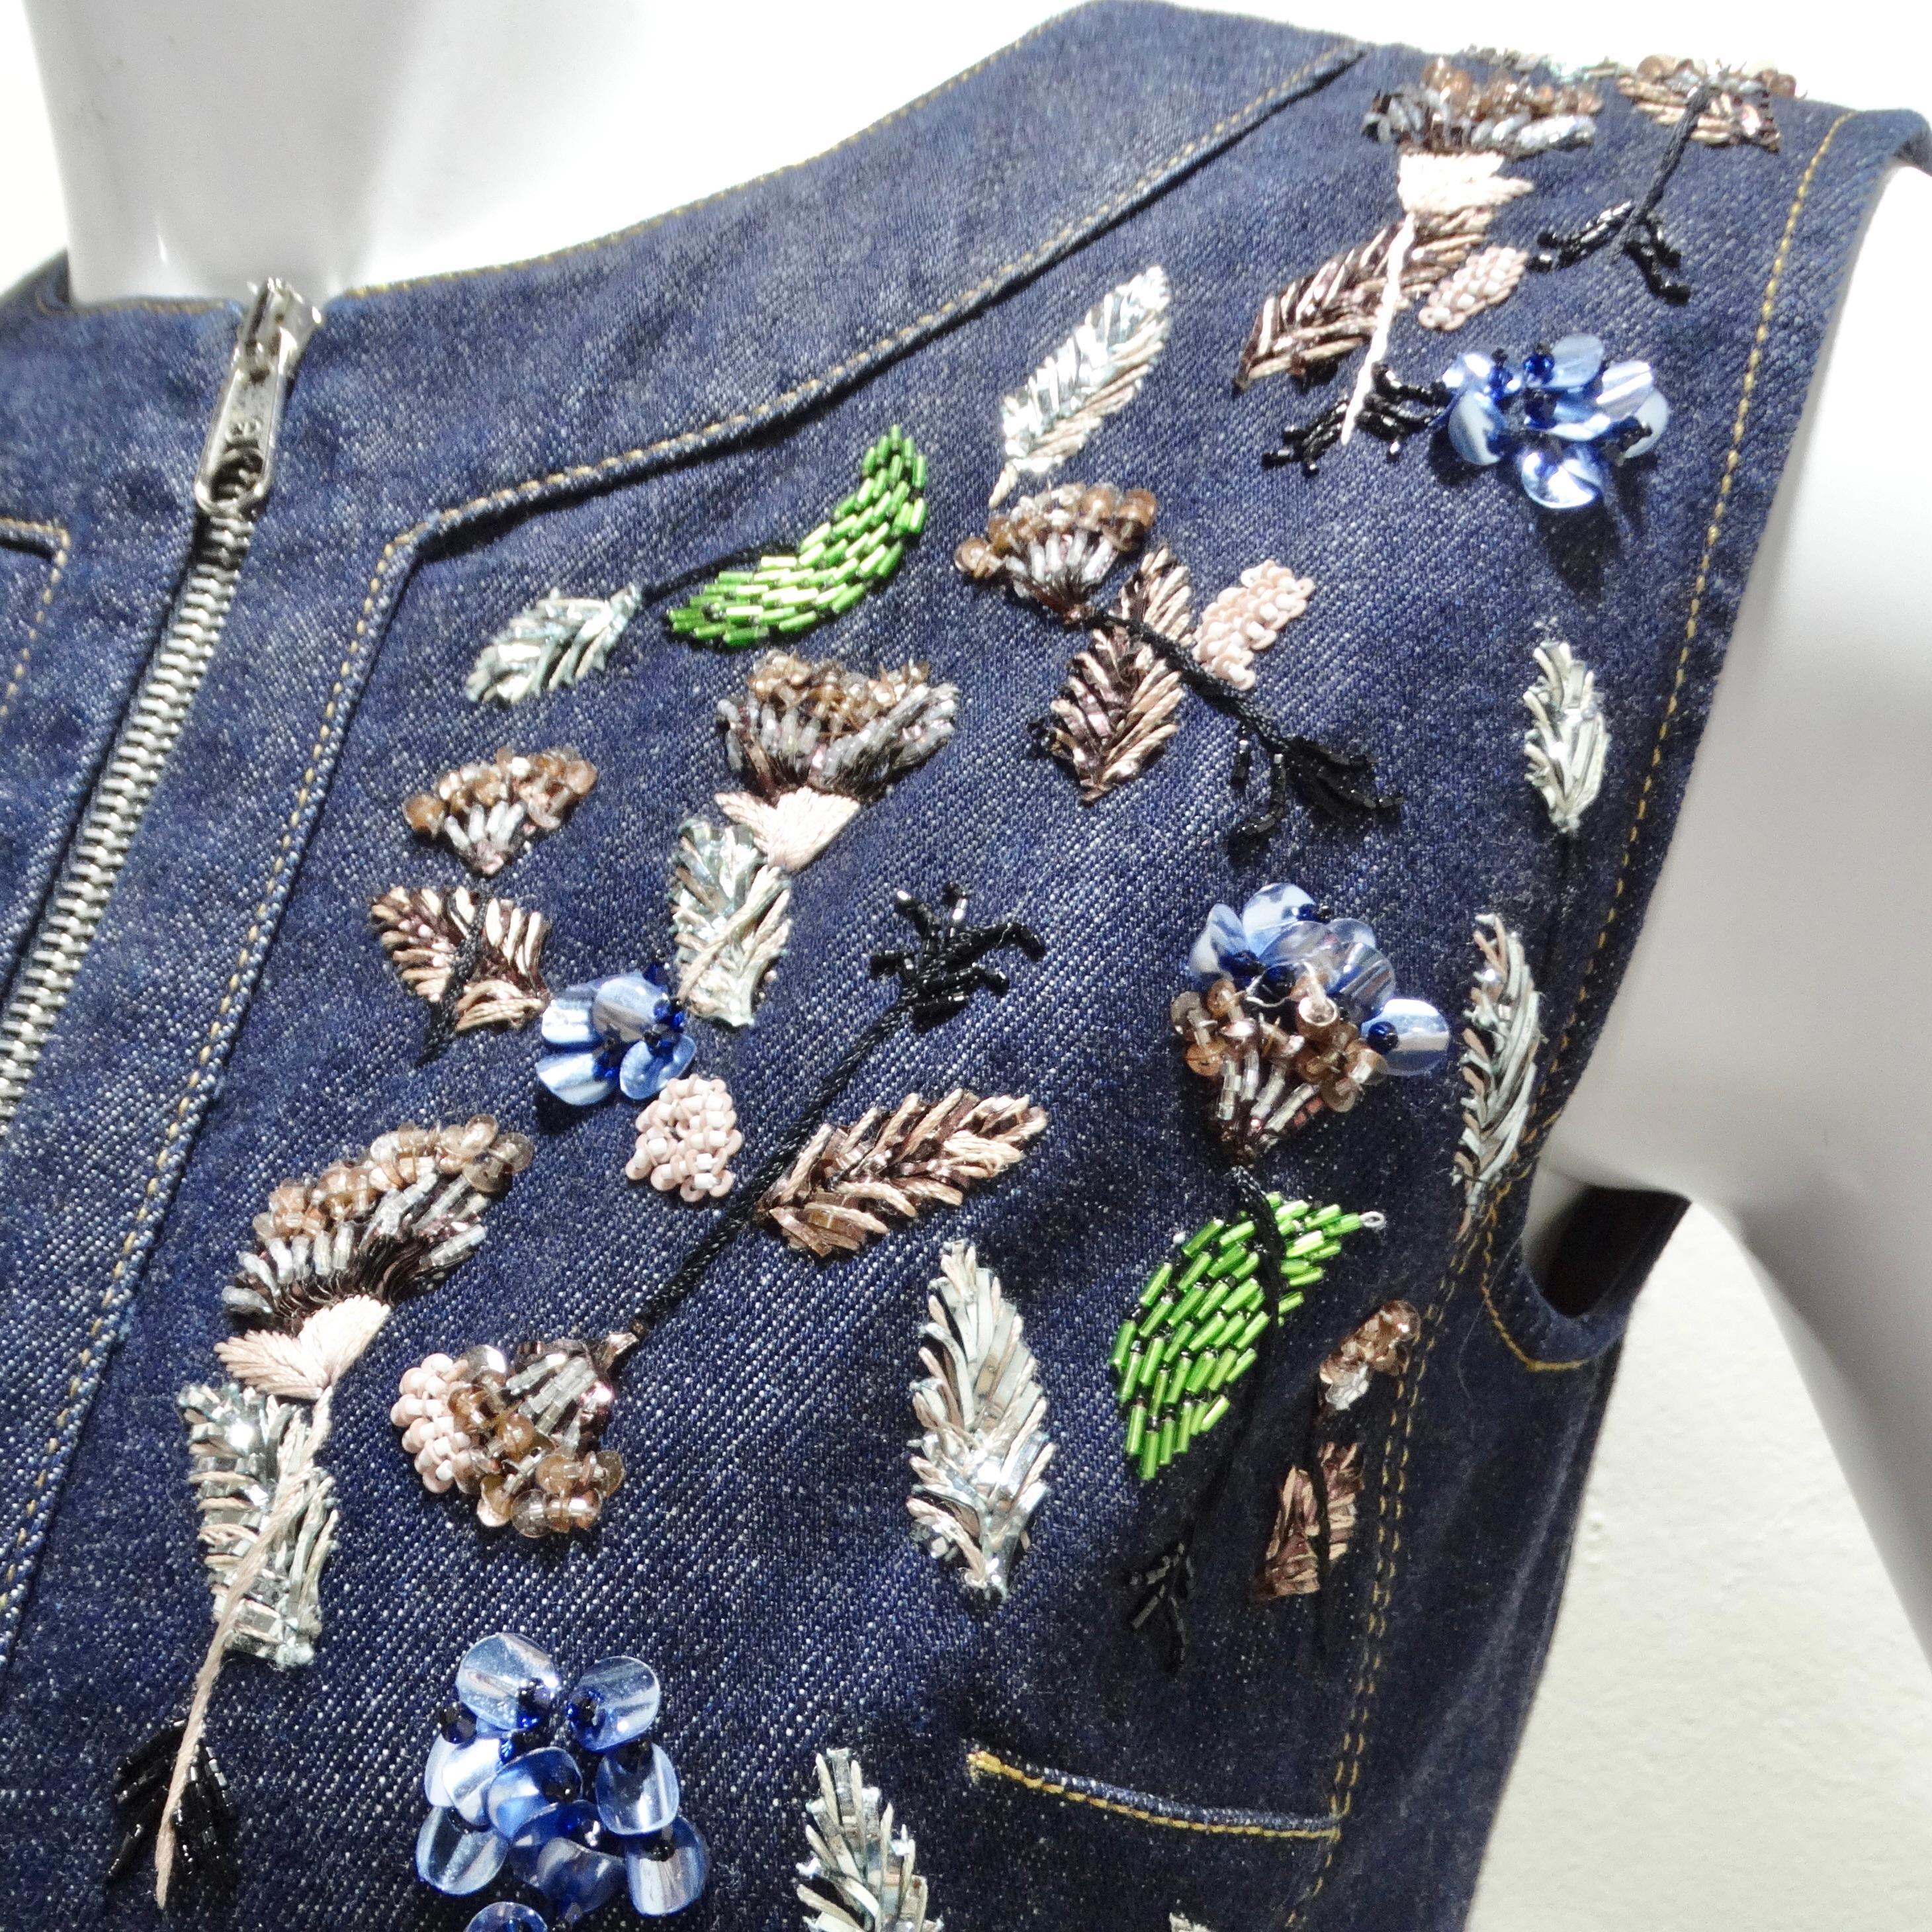 Christian Dior Denim Embroidered Sleeveless Dress In Excellent Condition For Sale In Scottsdale, AZ